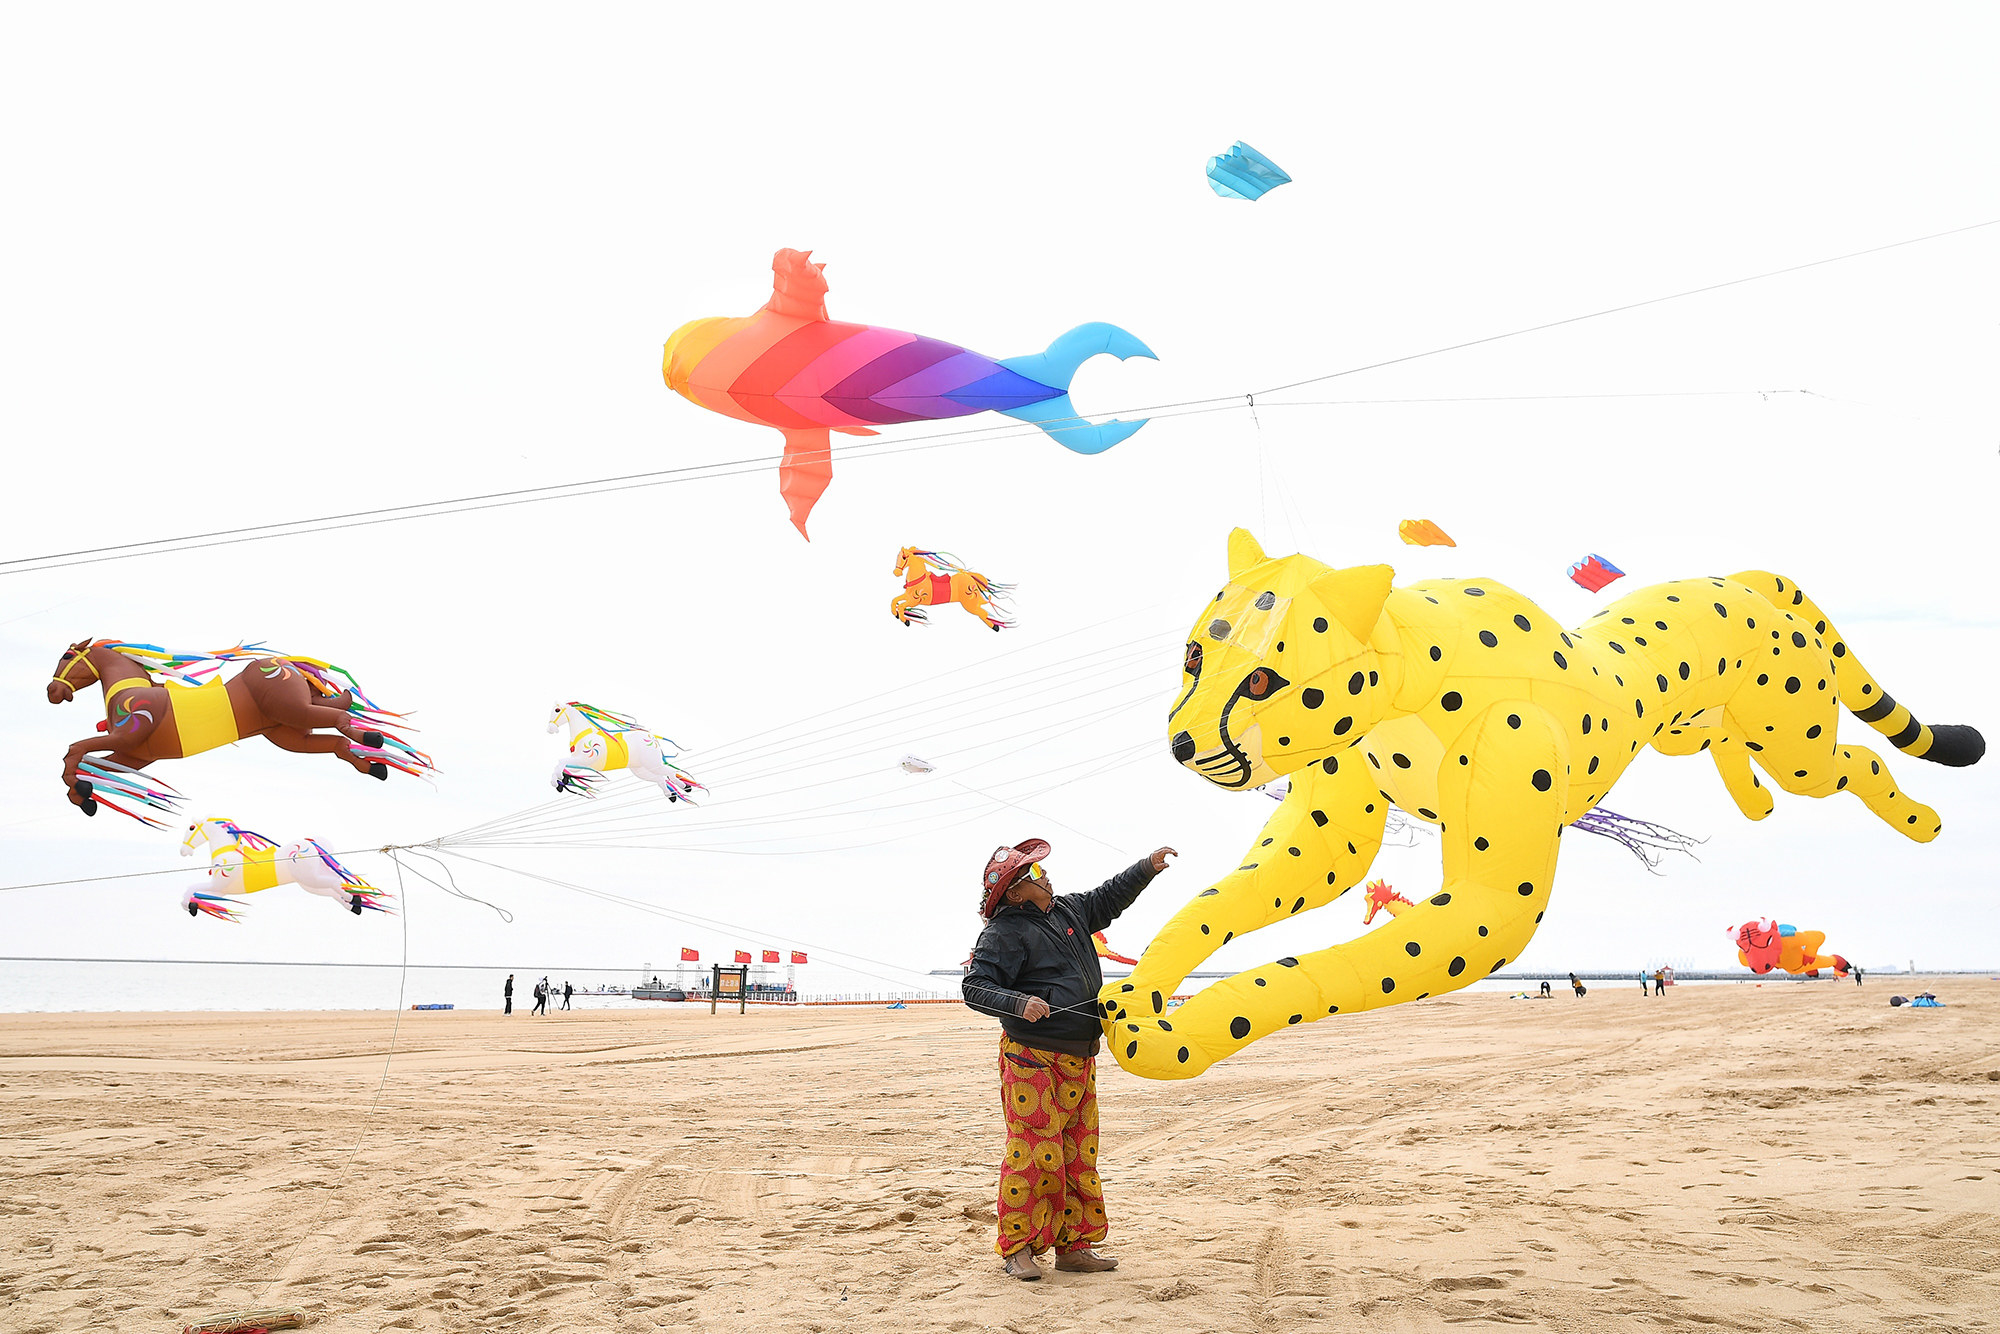 someone flies a gigantic yellow leopard kite in an openfield; in the background, there are colorful fish and horse kites in the air